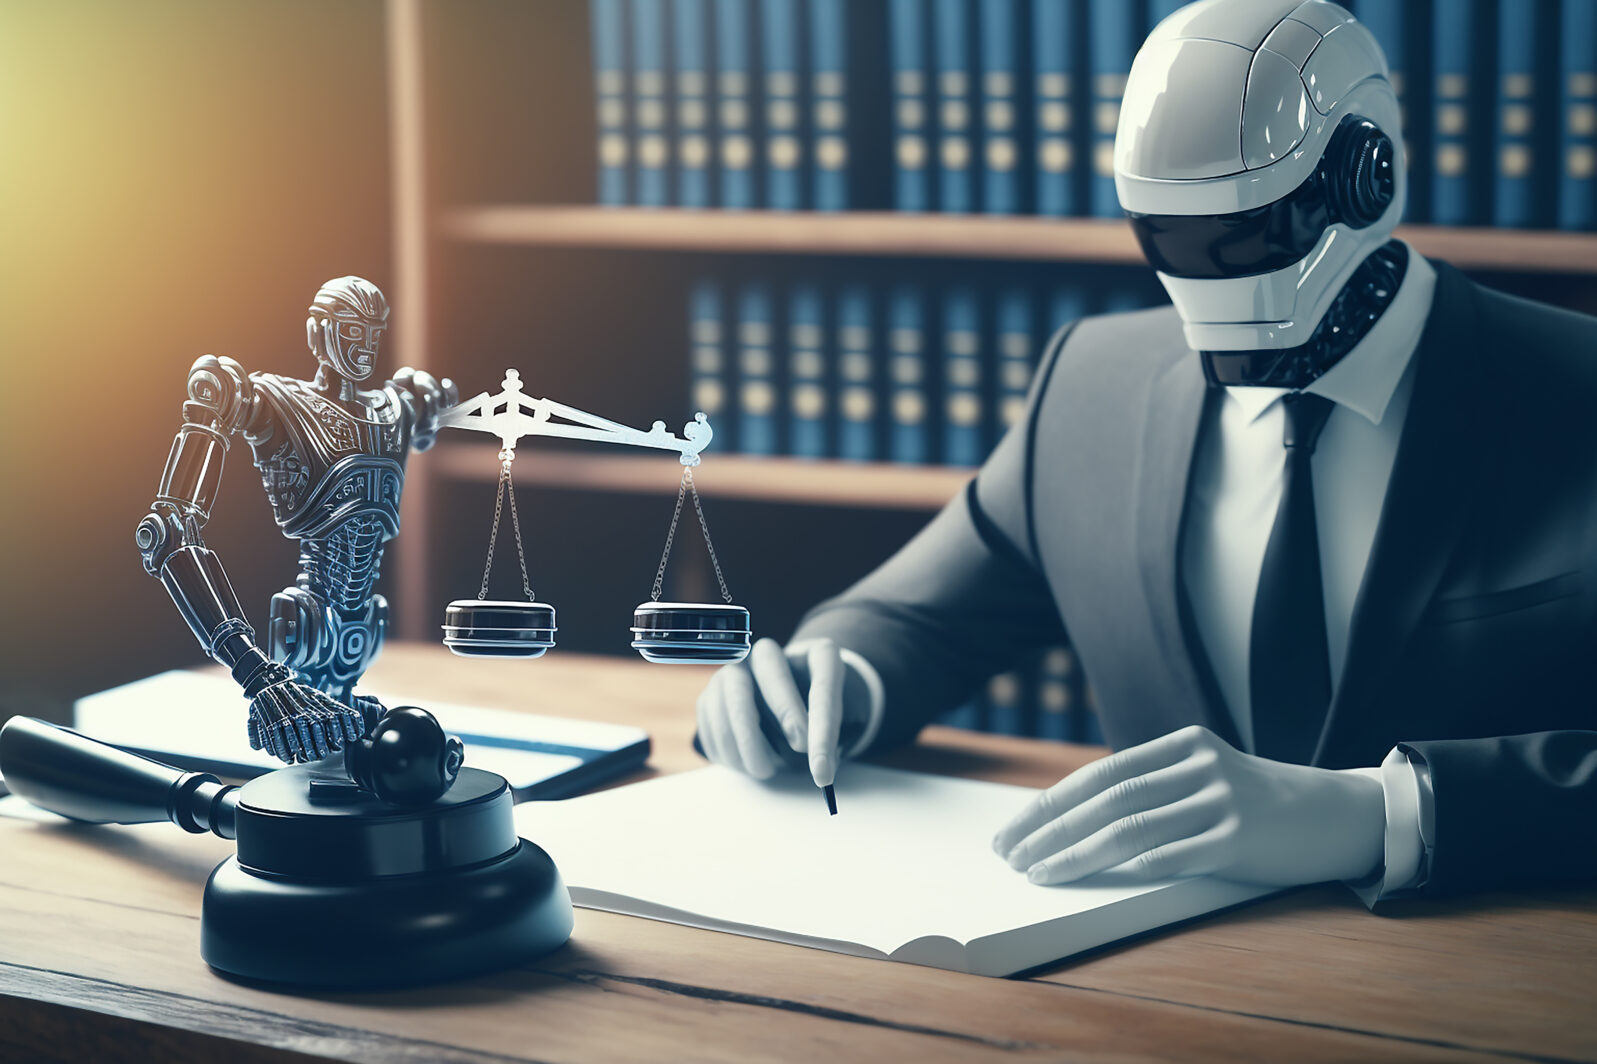 AI related law concept shown by robot hand using lawyer working tools in lawyers office with legal astute icons depicting artificial intelligence law . GEnerative IA